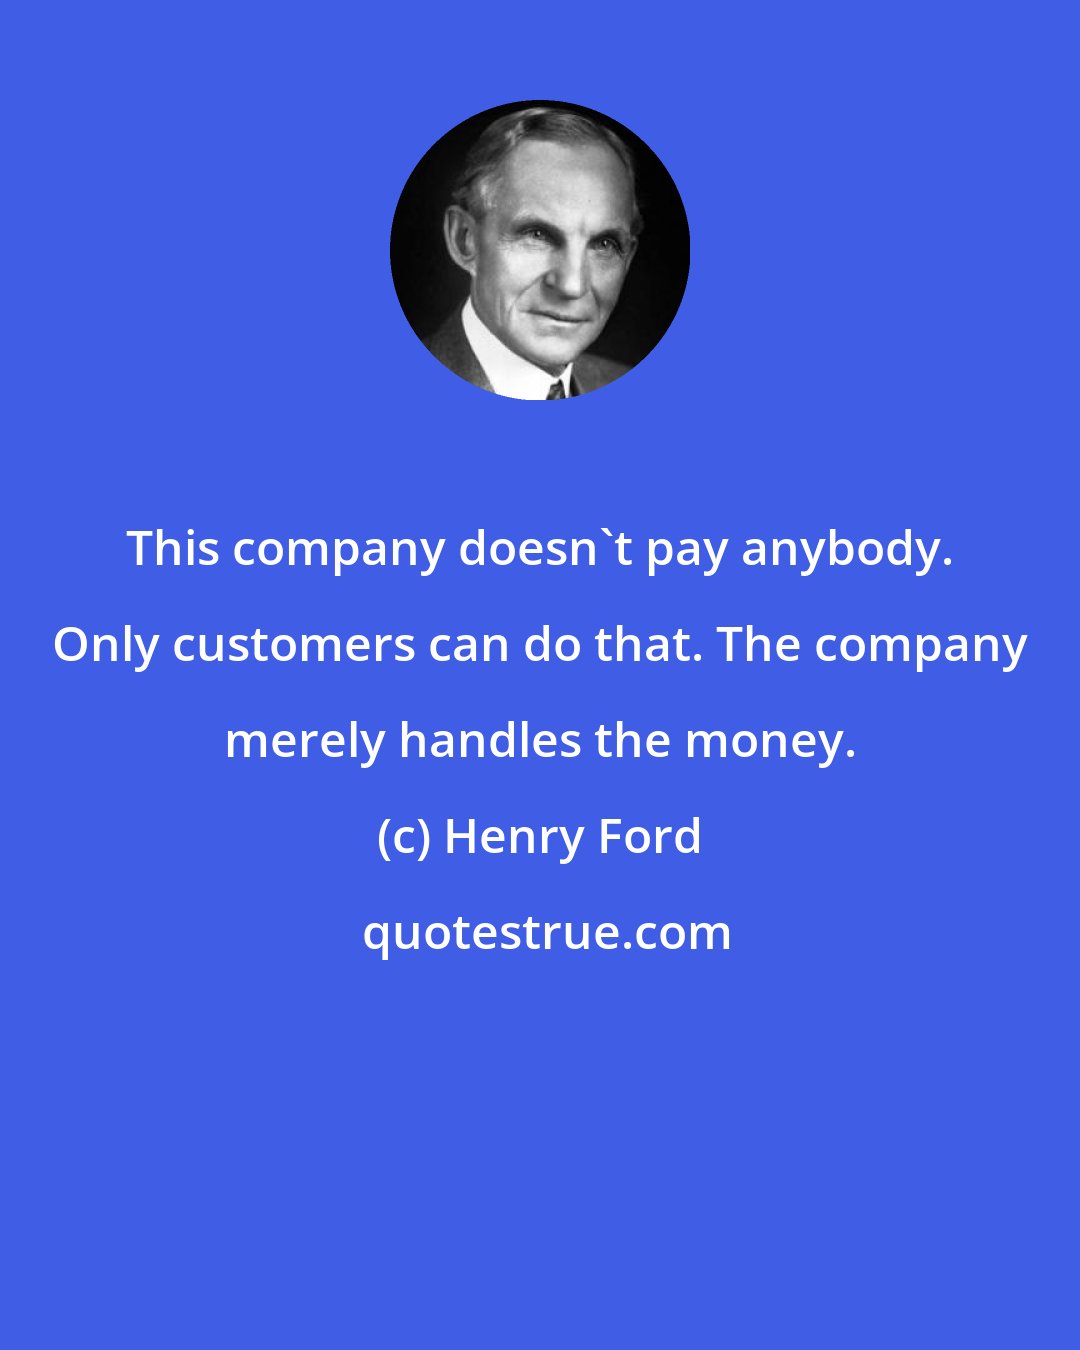 Henry Ford: This company doesn't pay anybody. Only customers can do that. The company merely handles the money.